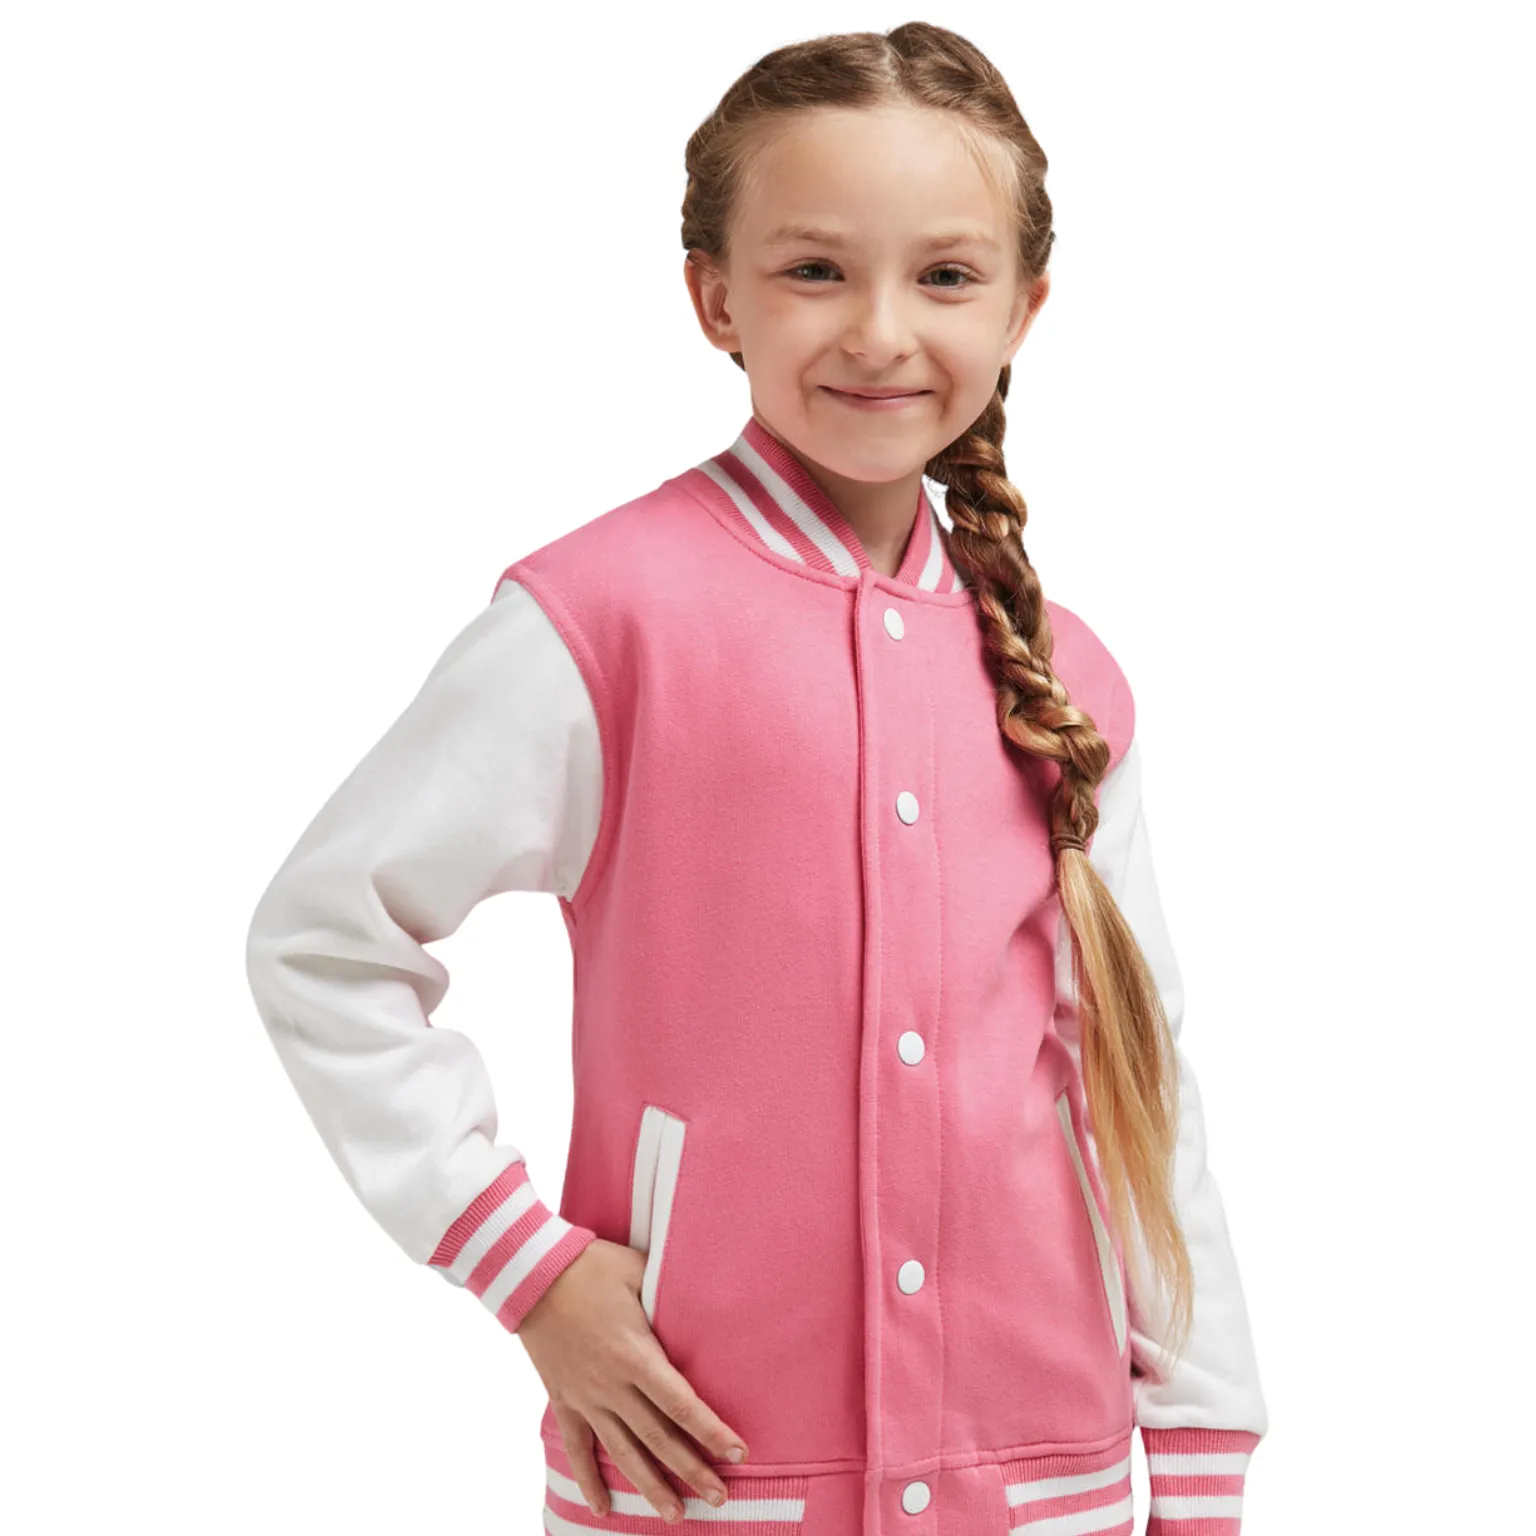 Kids Varsity Jacket manufacturing with trendy designs